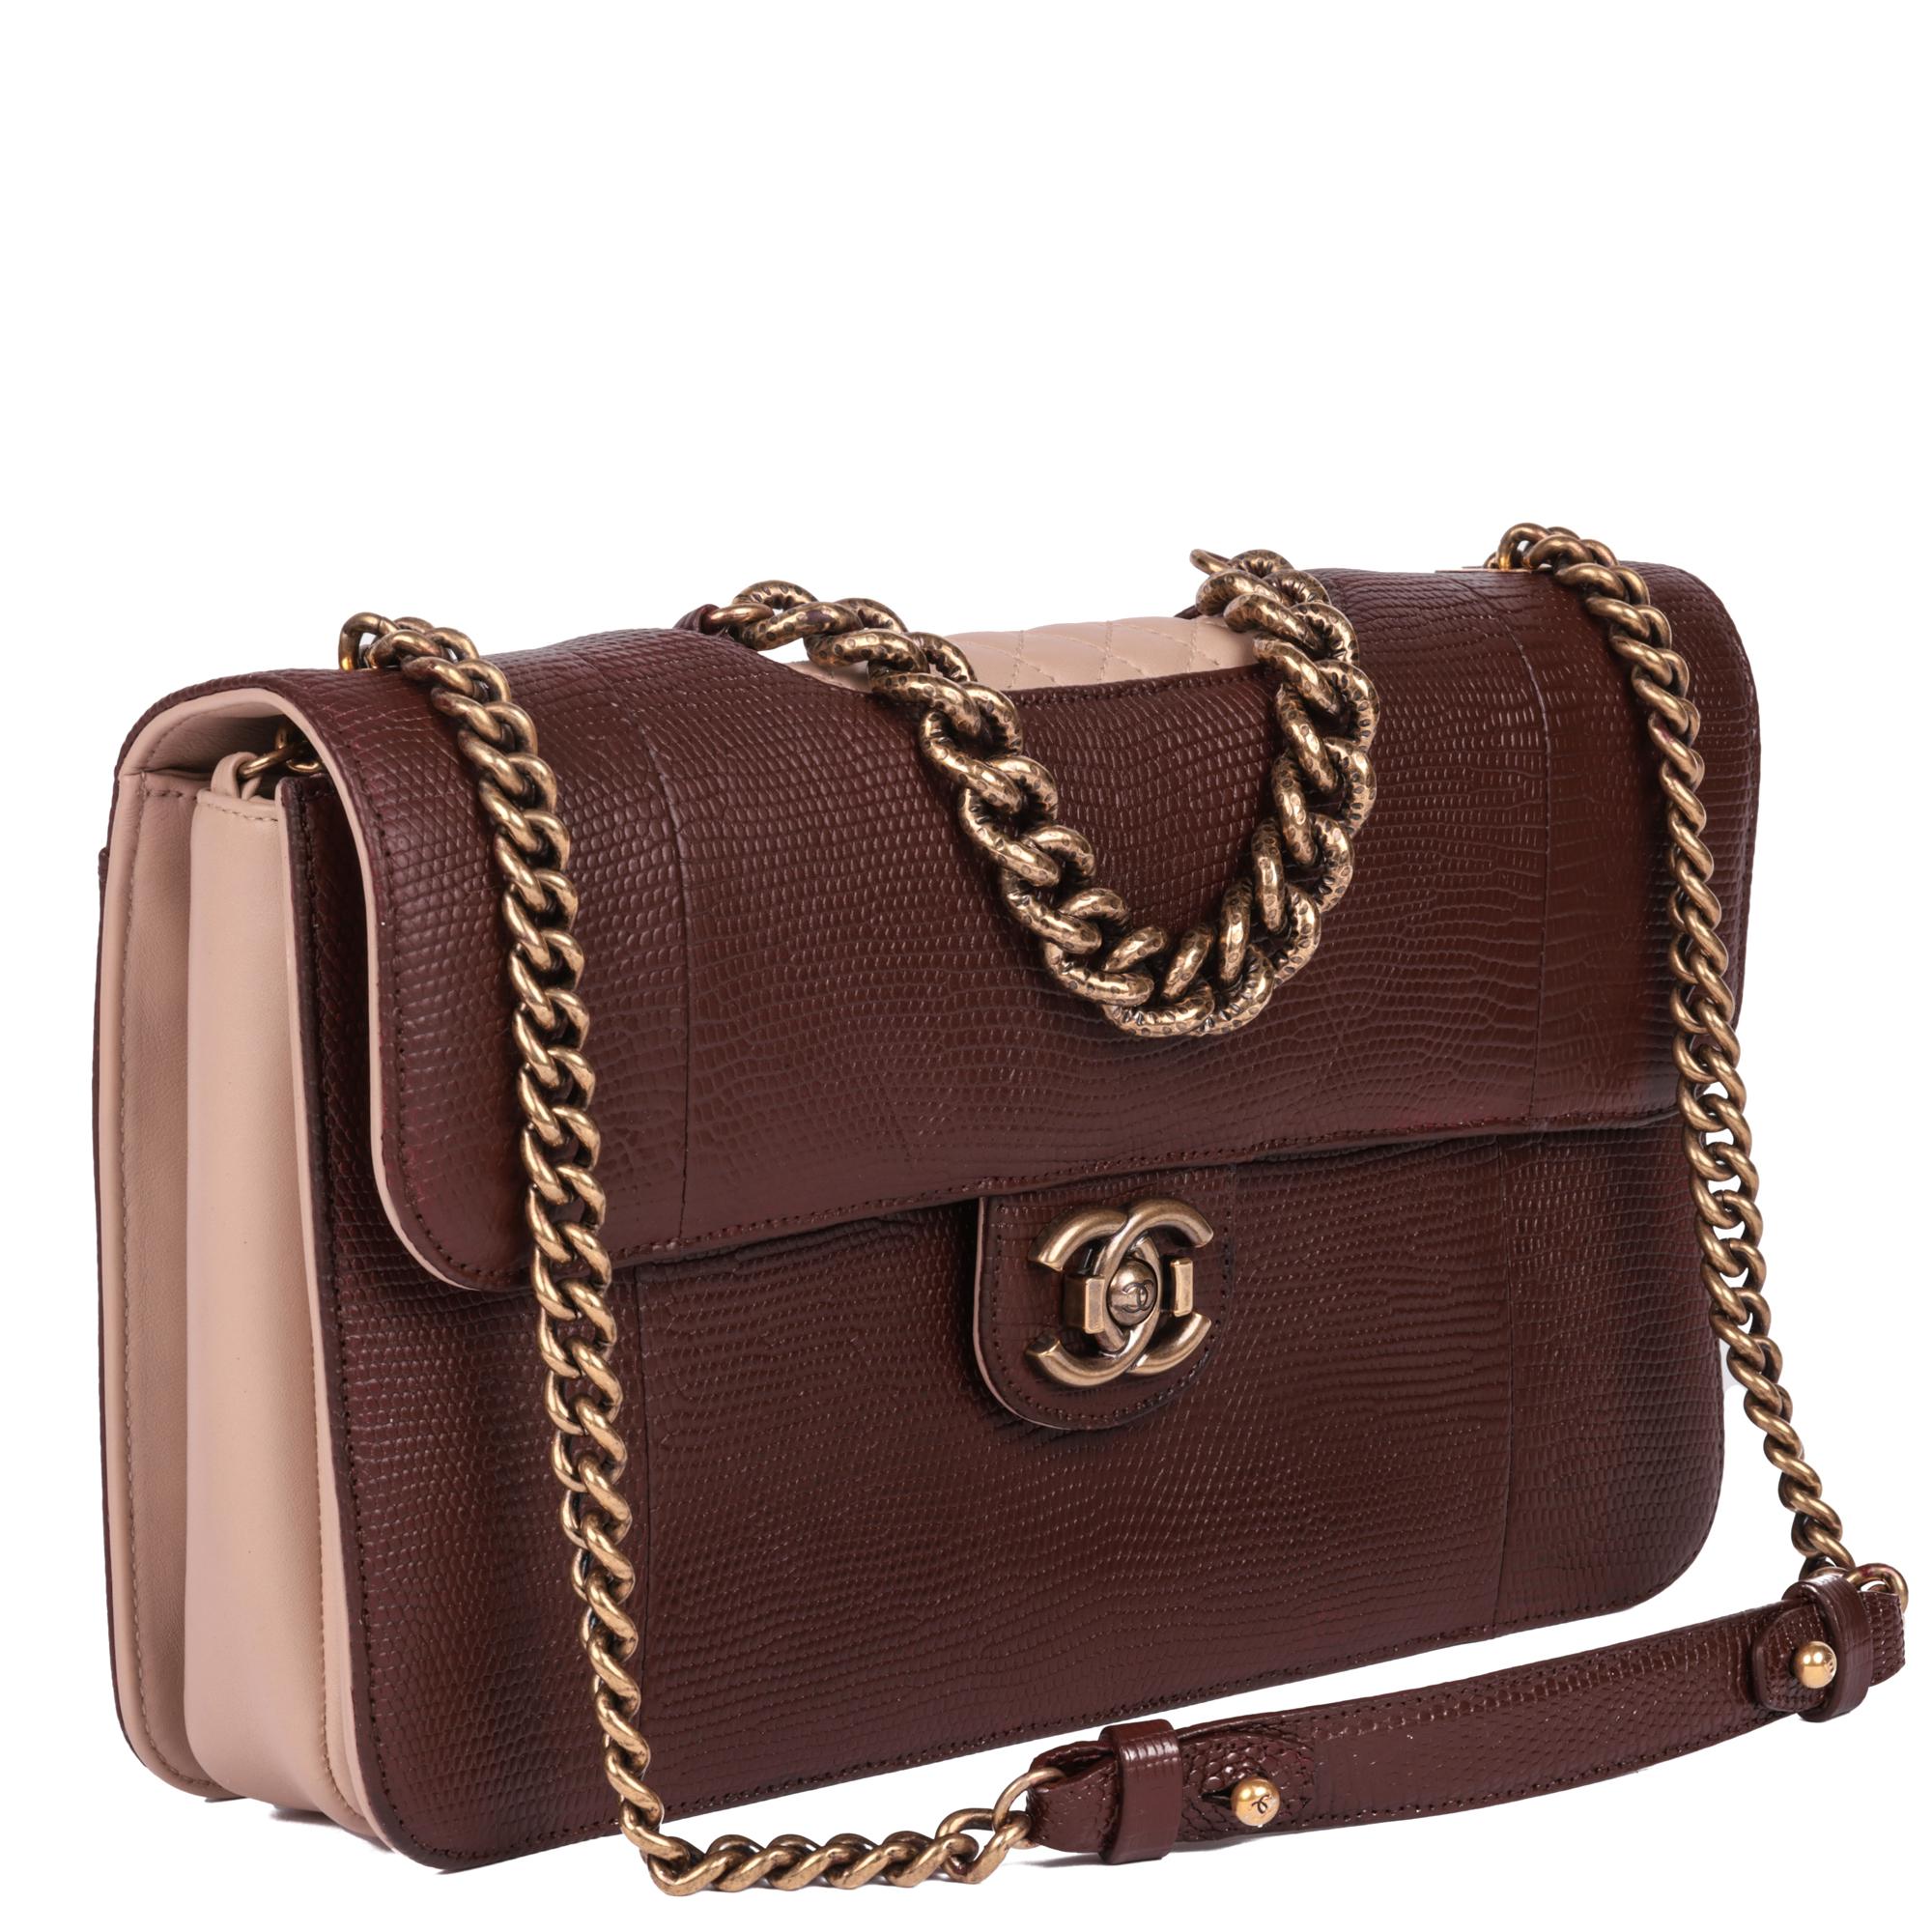 CHANEL 
Burgundy Lizard Leather & Dusky Pink Quilted Lambskin Large Perfect Edge Classic Single Flap Bag

Serial Number: 17122567
Age (Circa): 2013
Accompanied By: Chanel Dust Bag
Authenticity Details: Serial Sticker (Made in Italy) 
Gender: